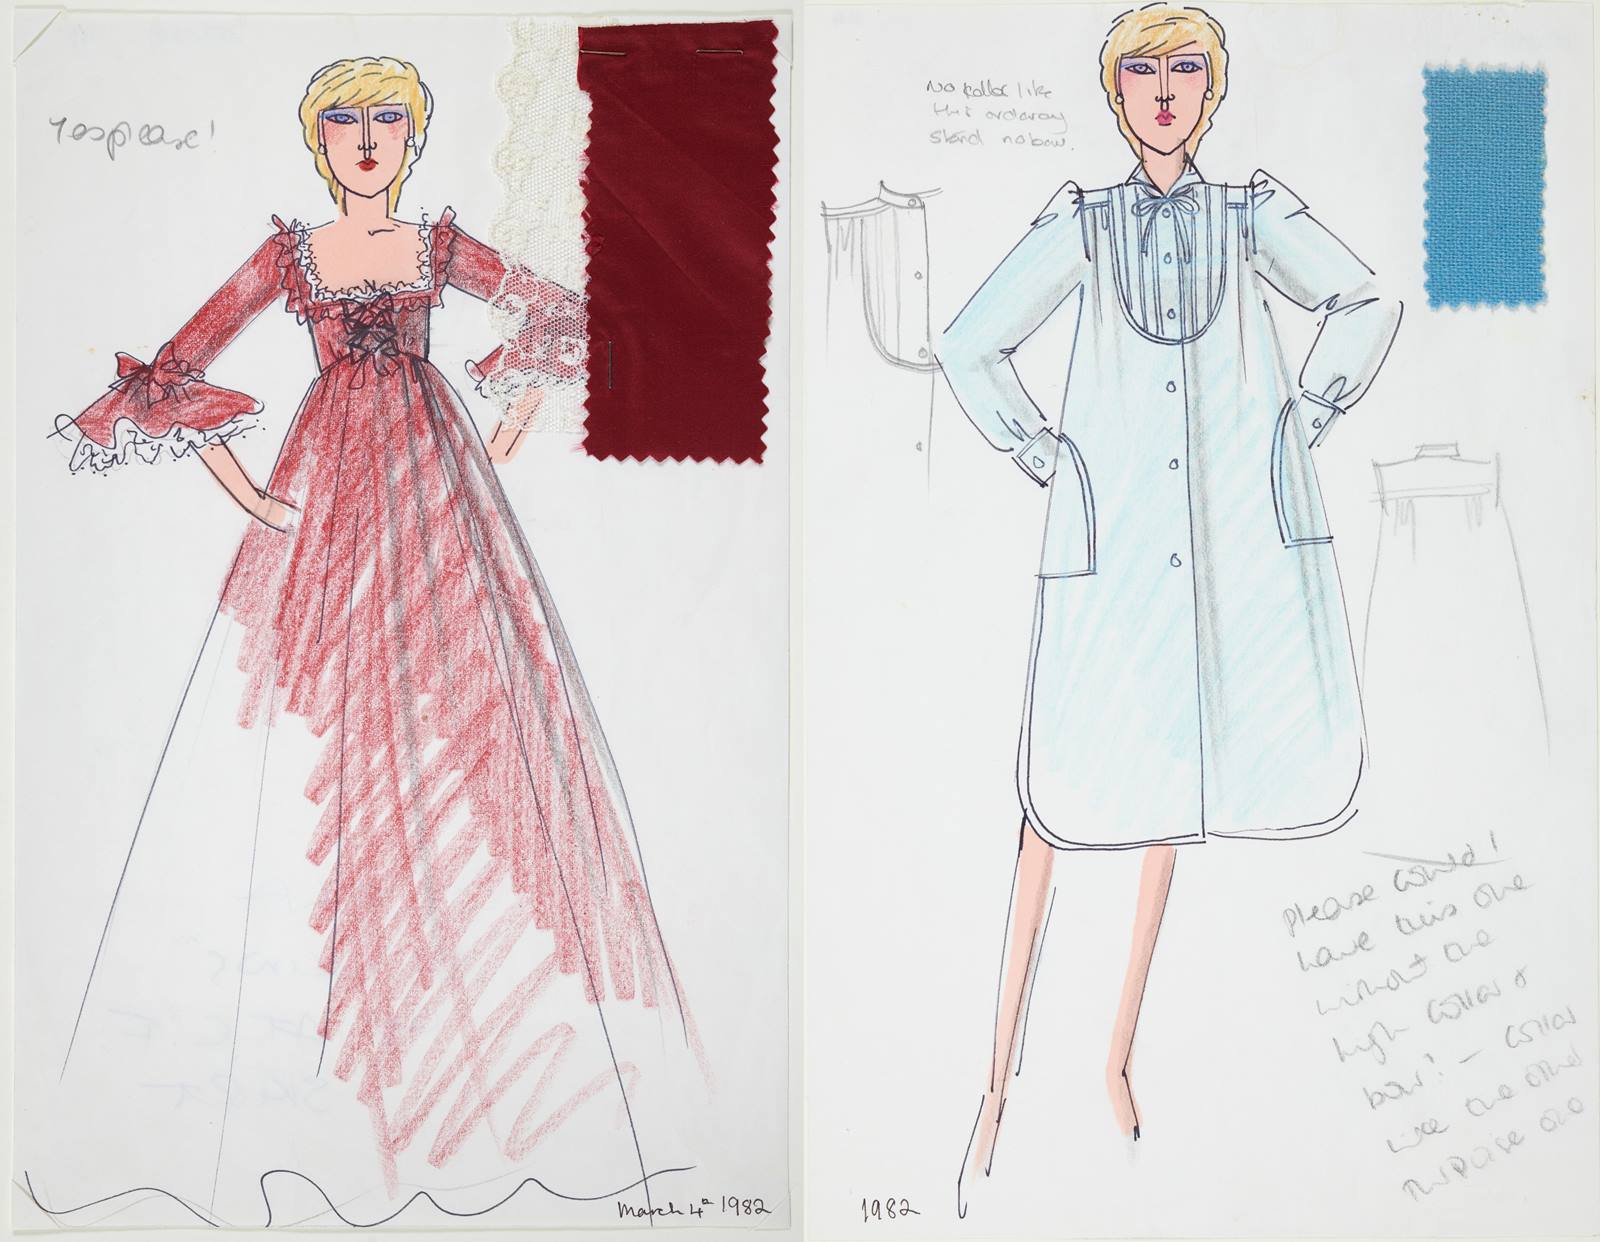 Sketches of Princess Diana’s dresses by David Sassoon
Diana had more 70 Bellville Sassoon outfits made between 1981 and her death in 1997. Her annotations here demonstrate her involvement in the process of having a dress designed. (Courtesy Historic Royal Palaces/ The Gift of David Sassoon) 
